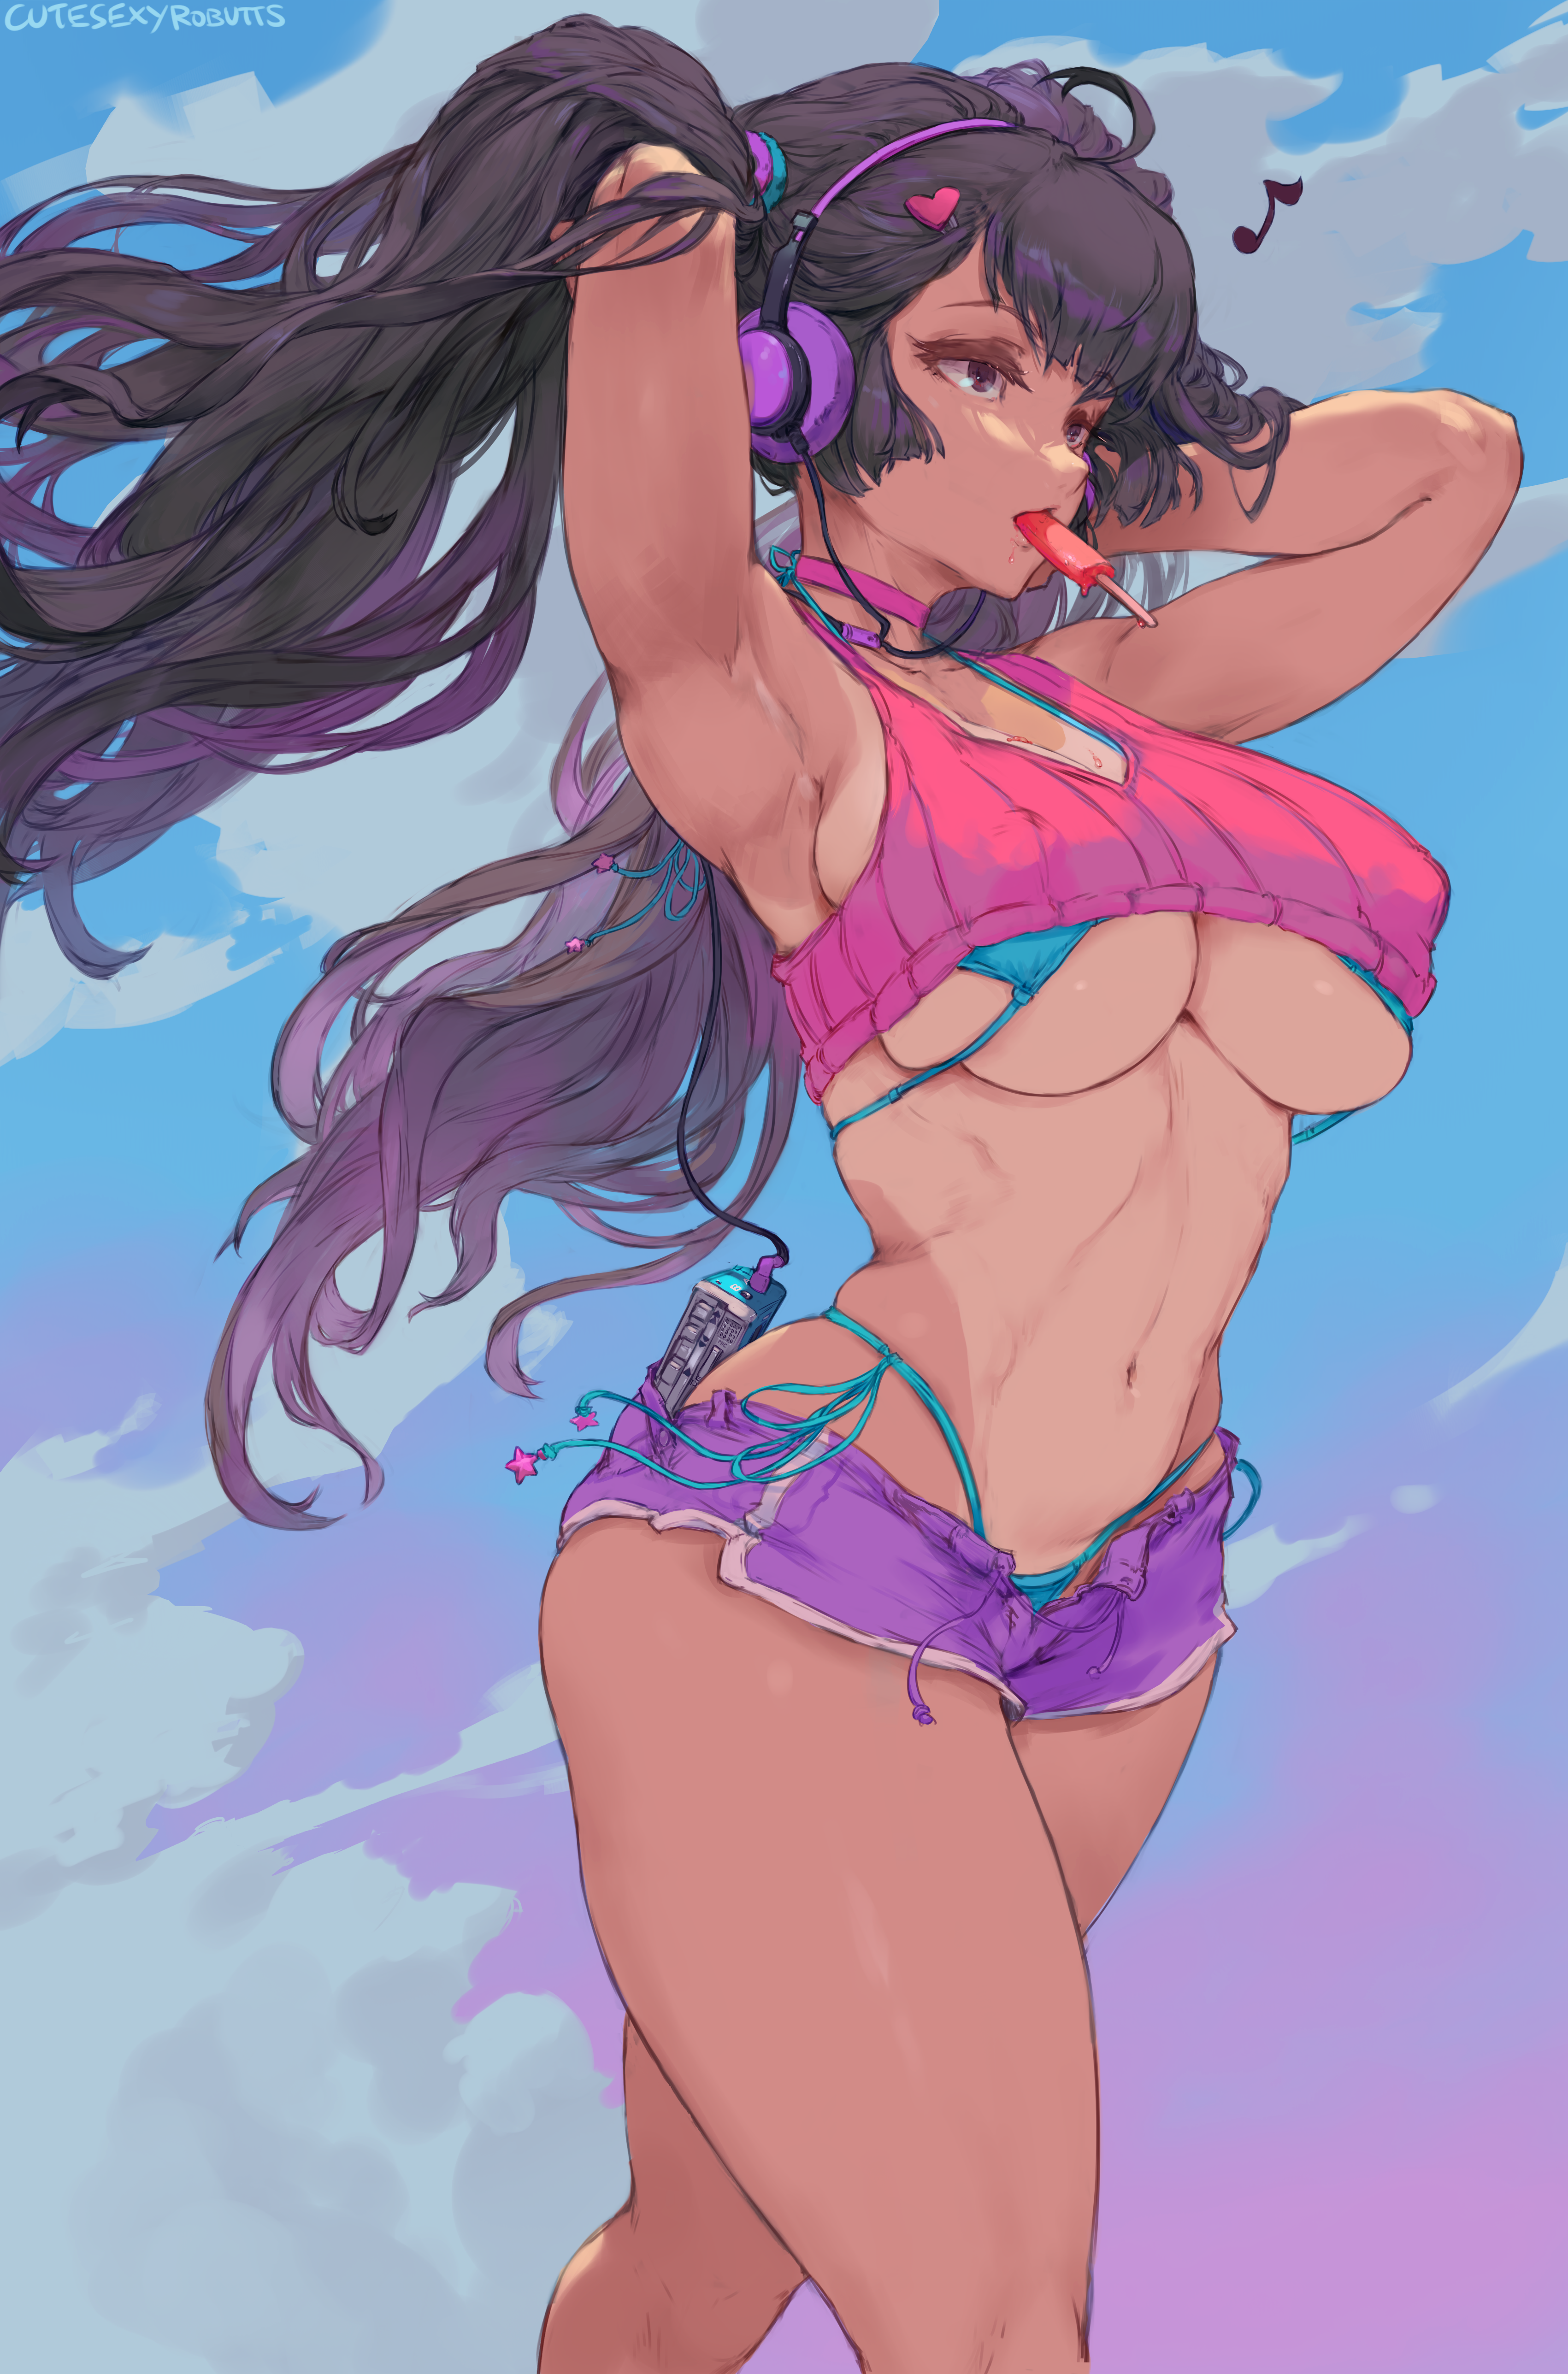 Anime 3402x5151 anime girls original characters anime long hair twintails headphones Walkman profile popsicle ice cream choker 1990s pink tops short tops bikini swimwear huge breasts underboob belly short shorts armpits thick thigh hands on head clouds portrait display walking 2D artwork drawing digital art Cutesexyrobutts tanned tan lines hairpins gradient hair standing arms up arms behind head string panties string bikini